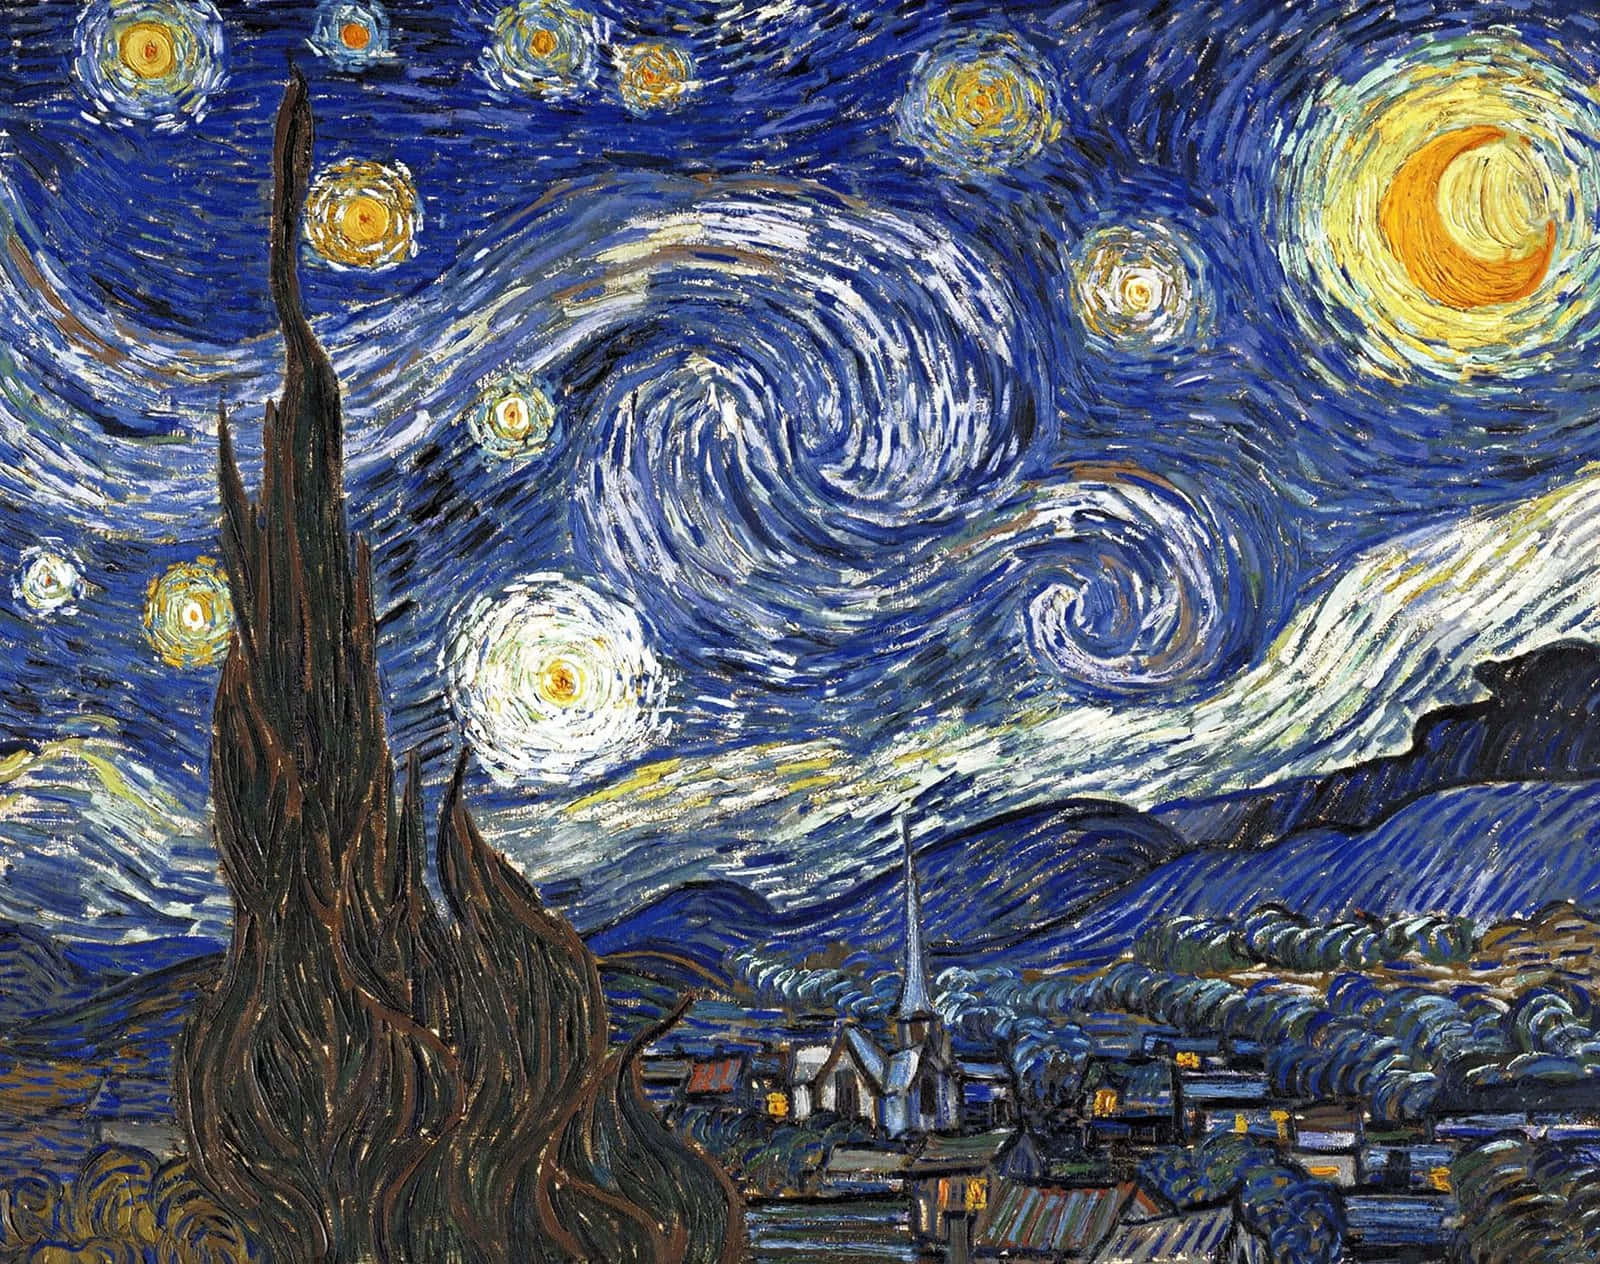 "The Starry Night" by Vincent Van Gogh